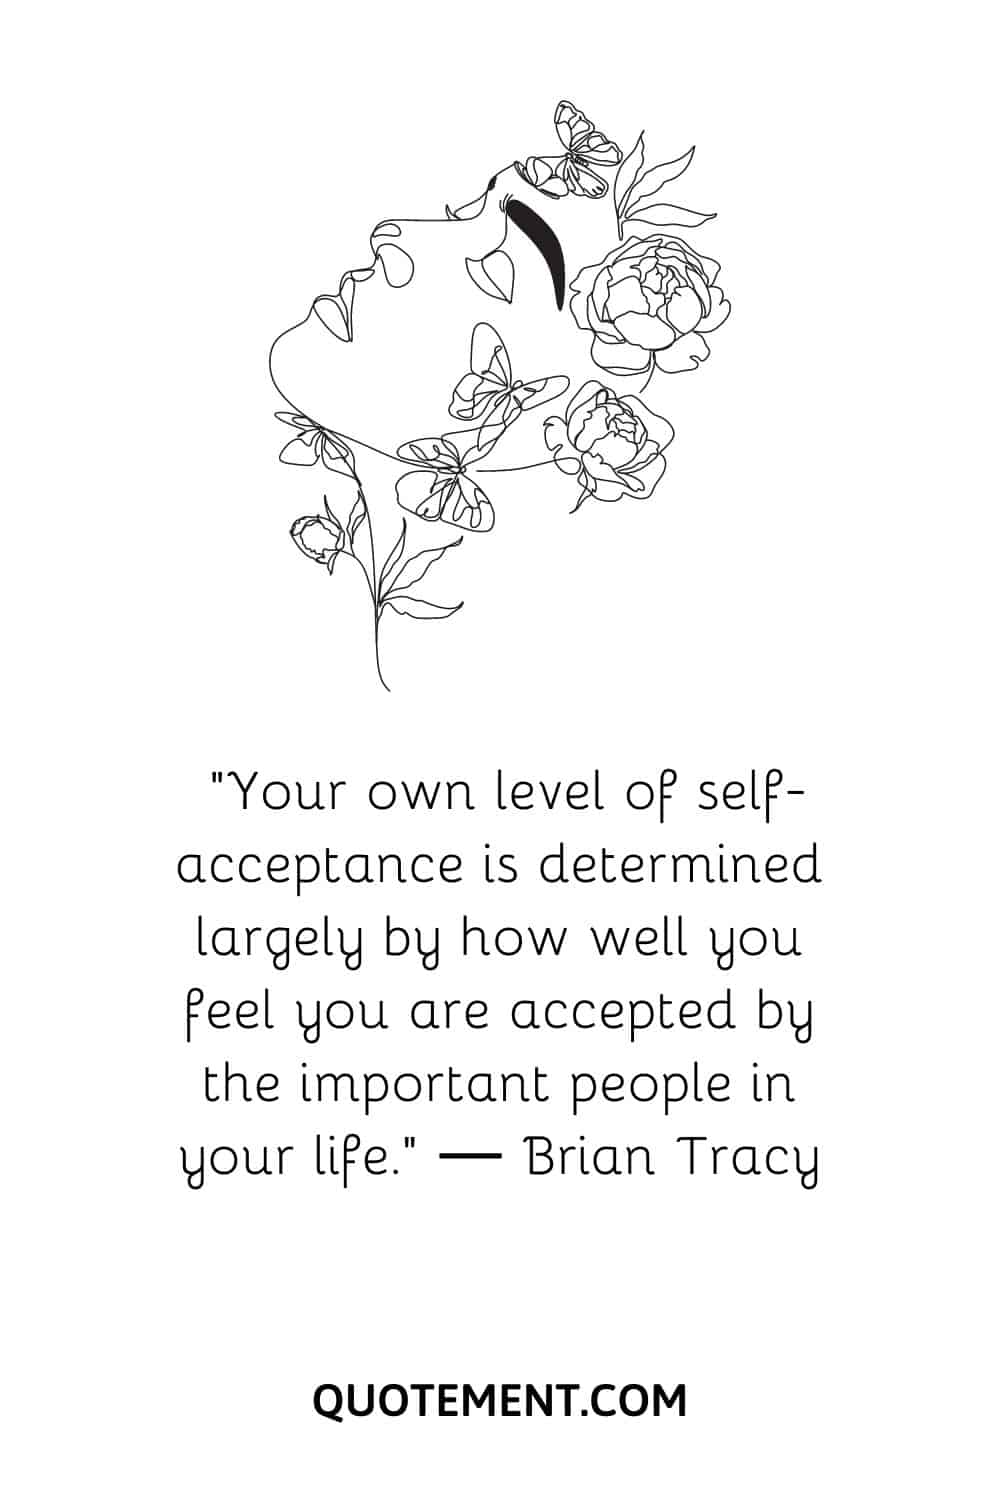 “Your own level of self-acceptance is determined largely by how well you feel you are accepted by the important people in your life.” ― Brian Tracy